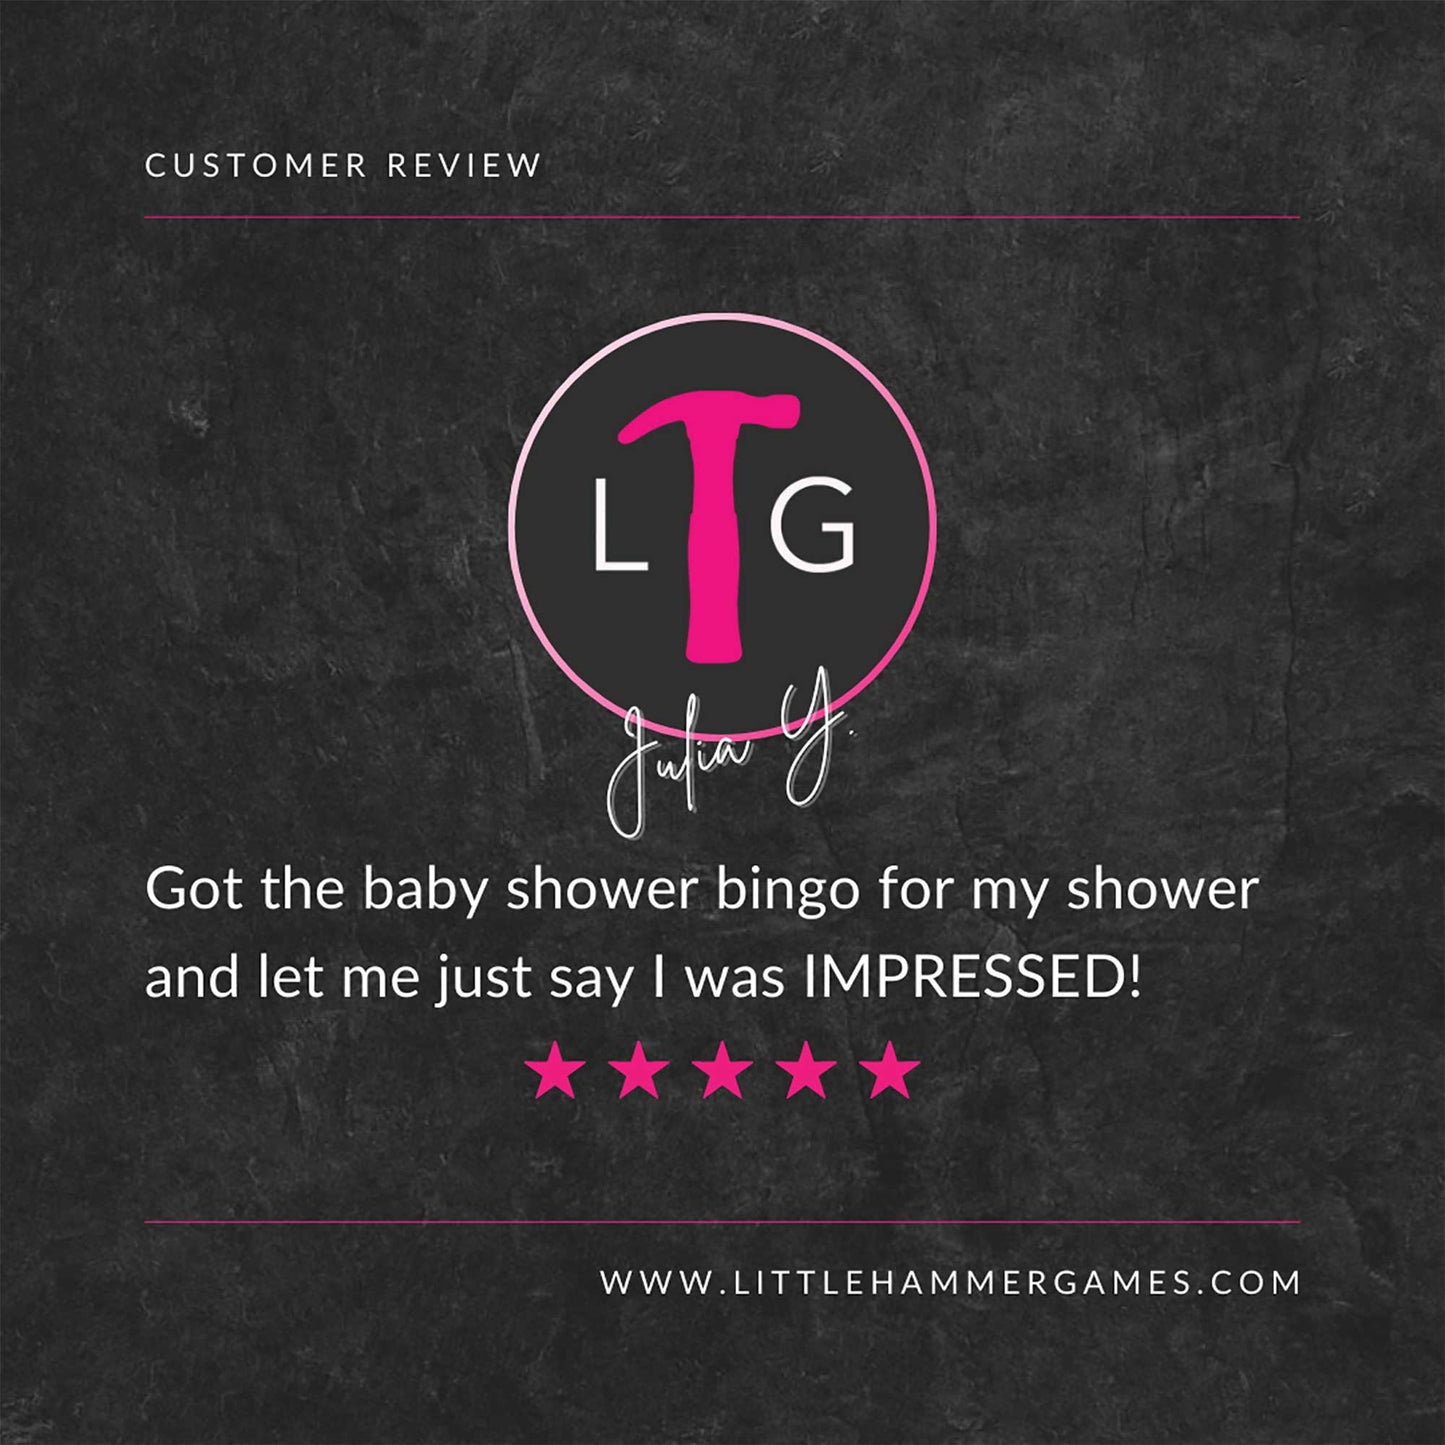 White and pink text on a slate background with a 5-star review that says "Got the baby shower bingo for my shower and let me just say I was impressed!"